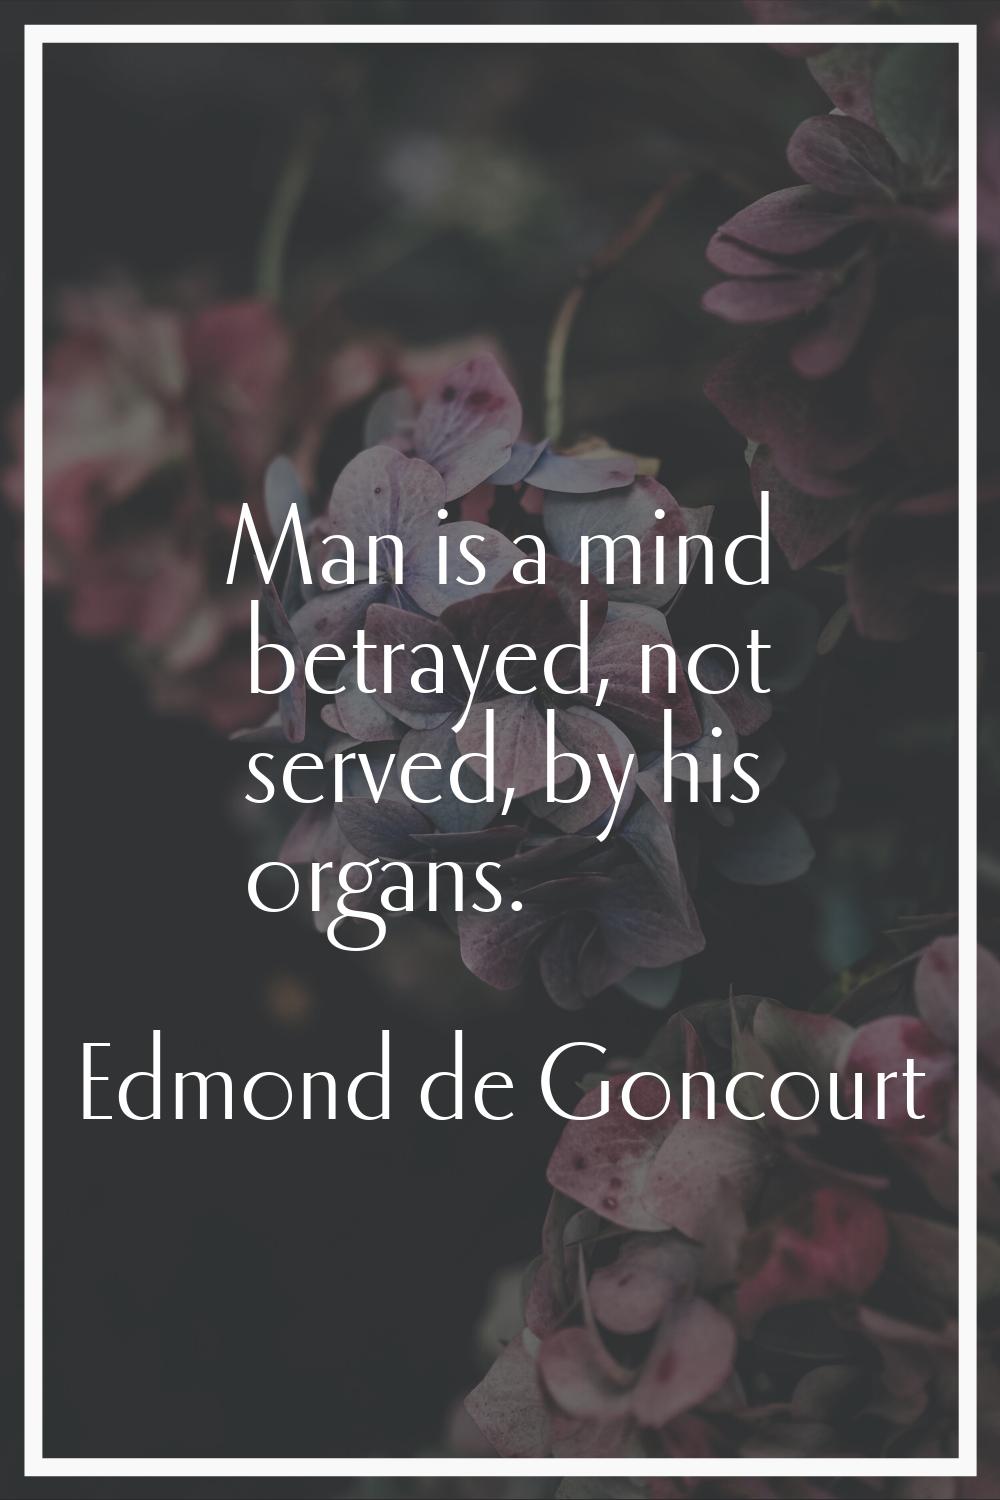 Man is a mind betrayed, not served, by his organs.